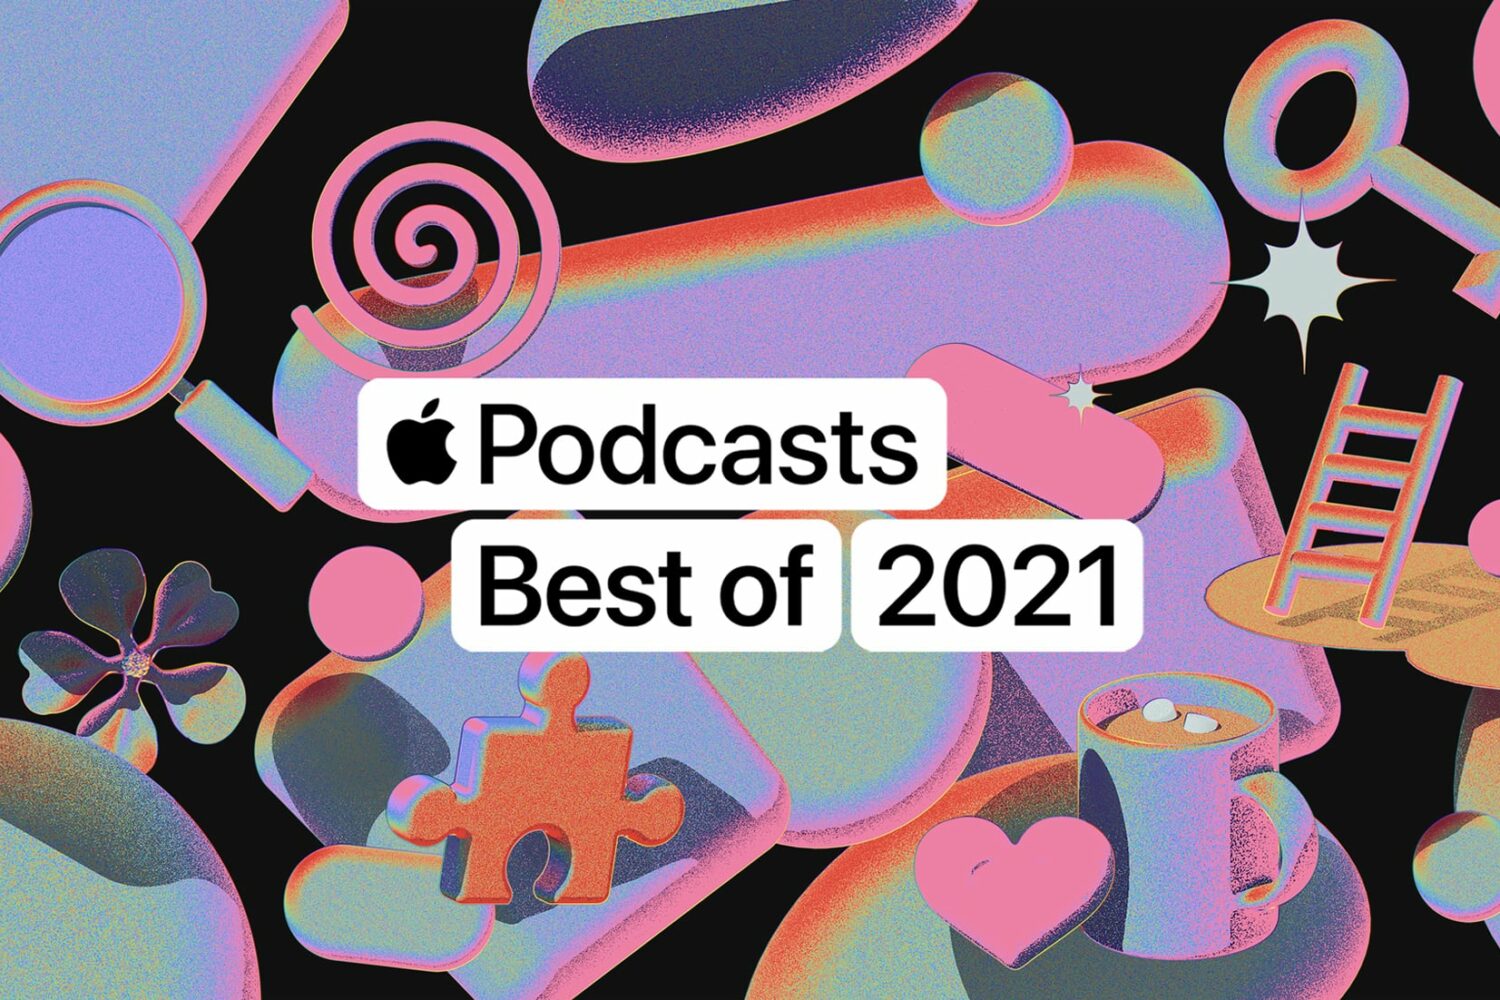 Apple's marketing image for the Best of 2021 charts on Apple Podcasts